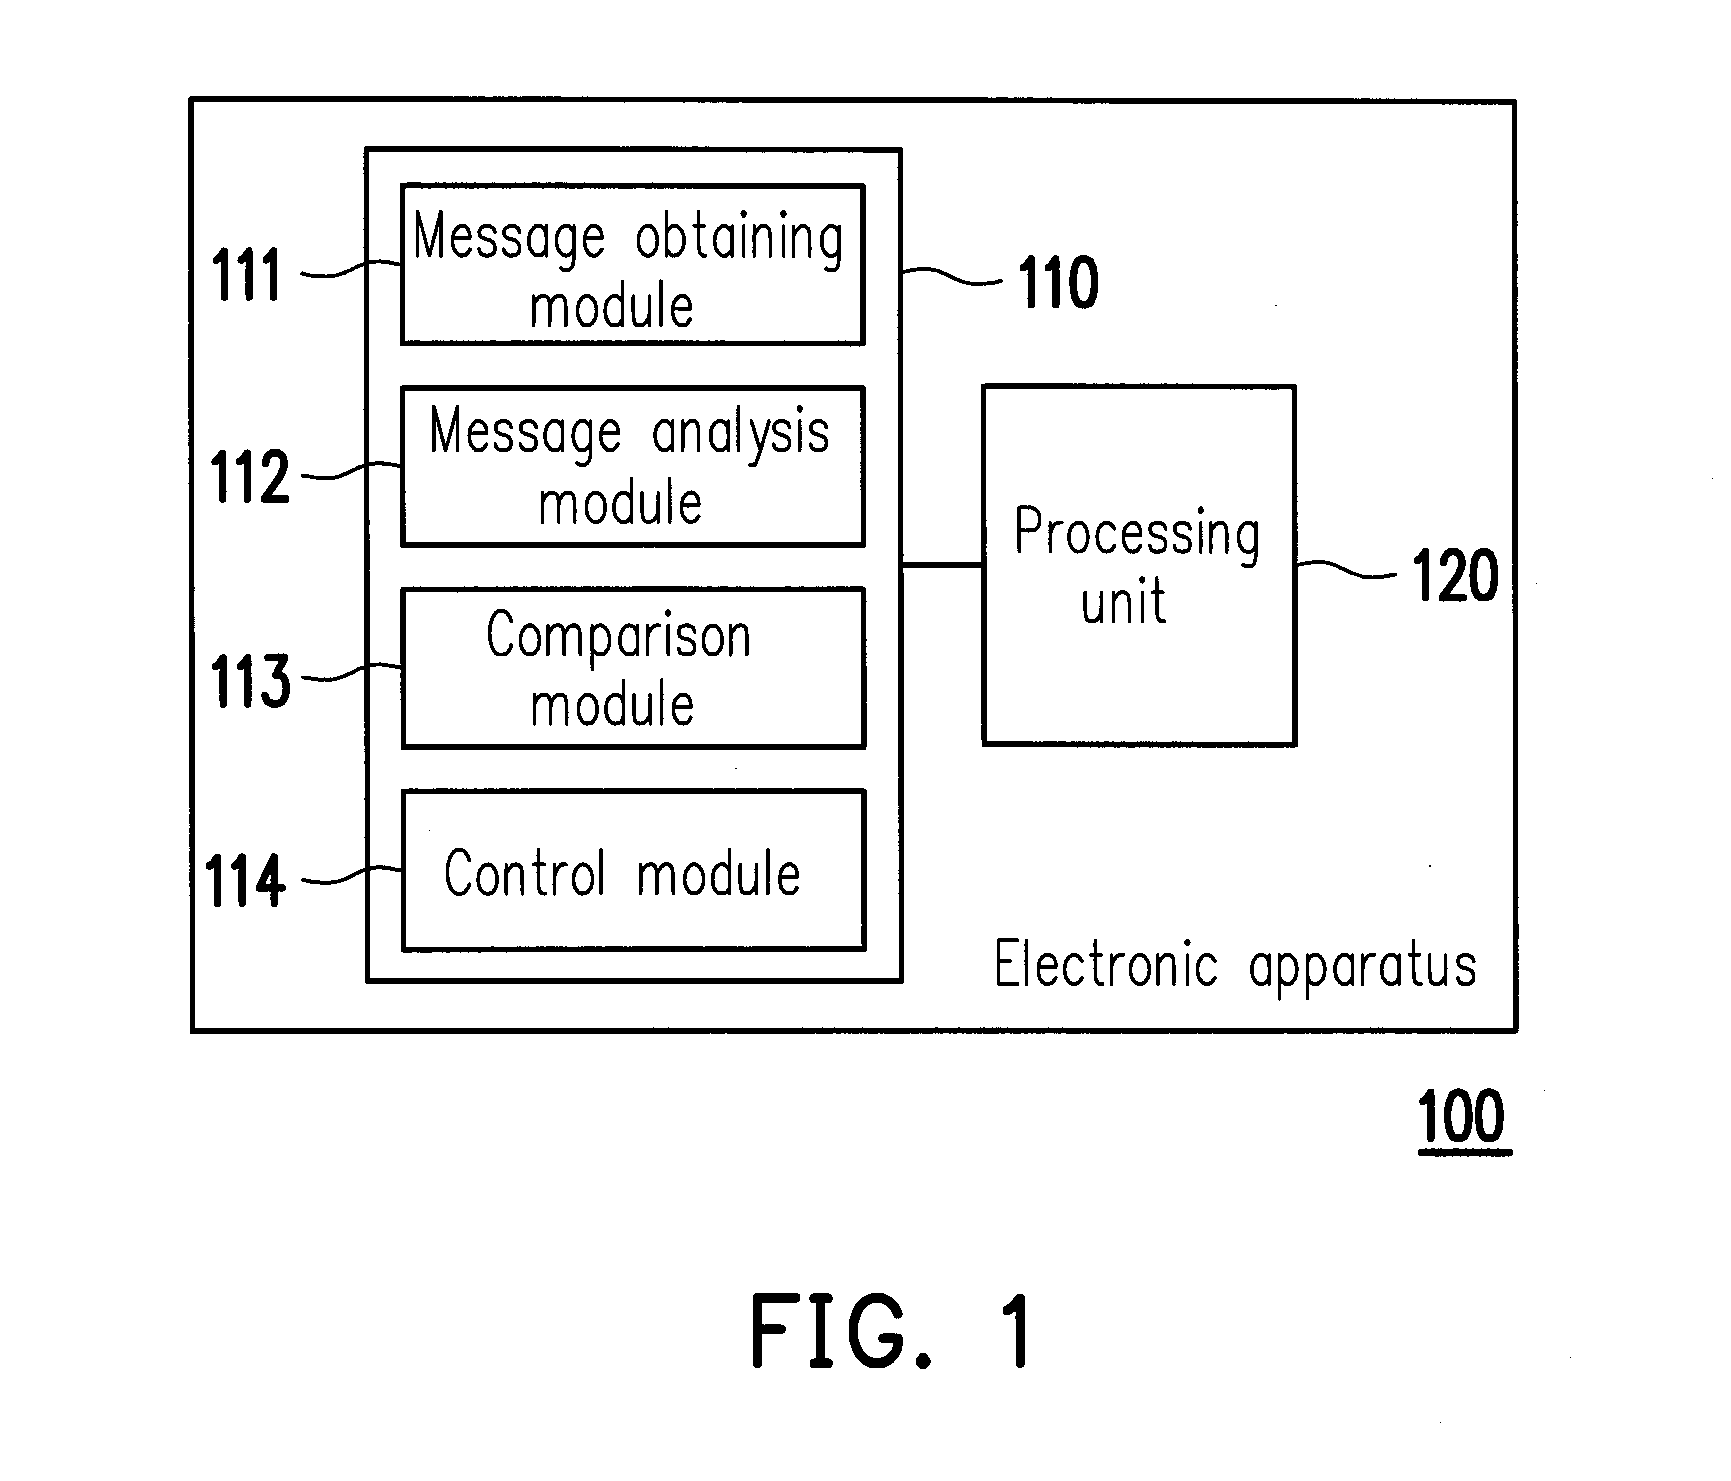 Method, apparatus and computer readable medium for automatic debugging and error prevention